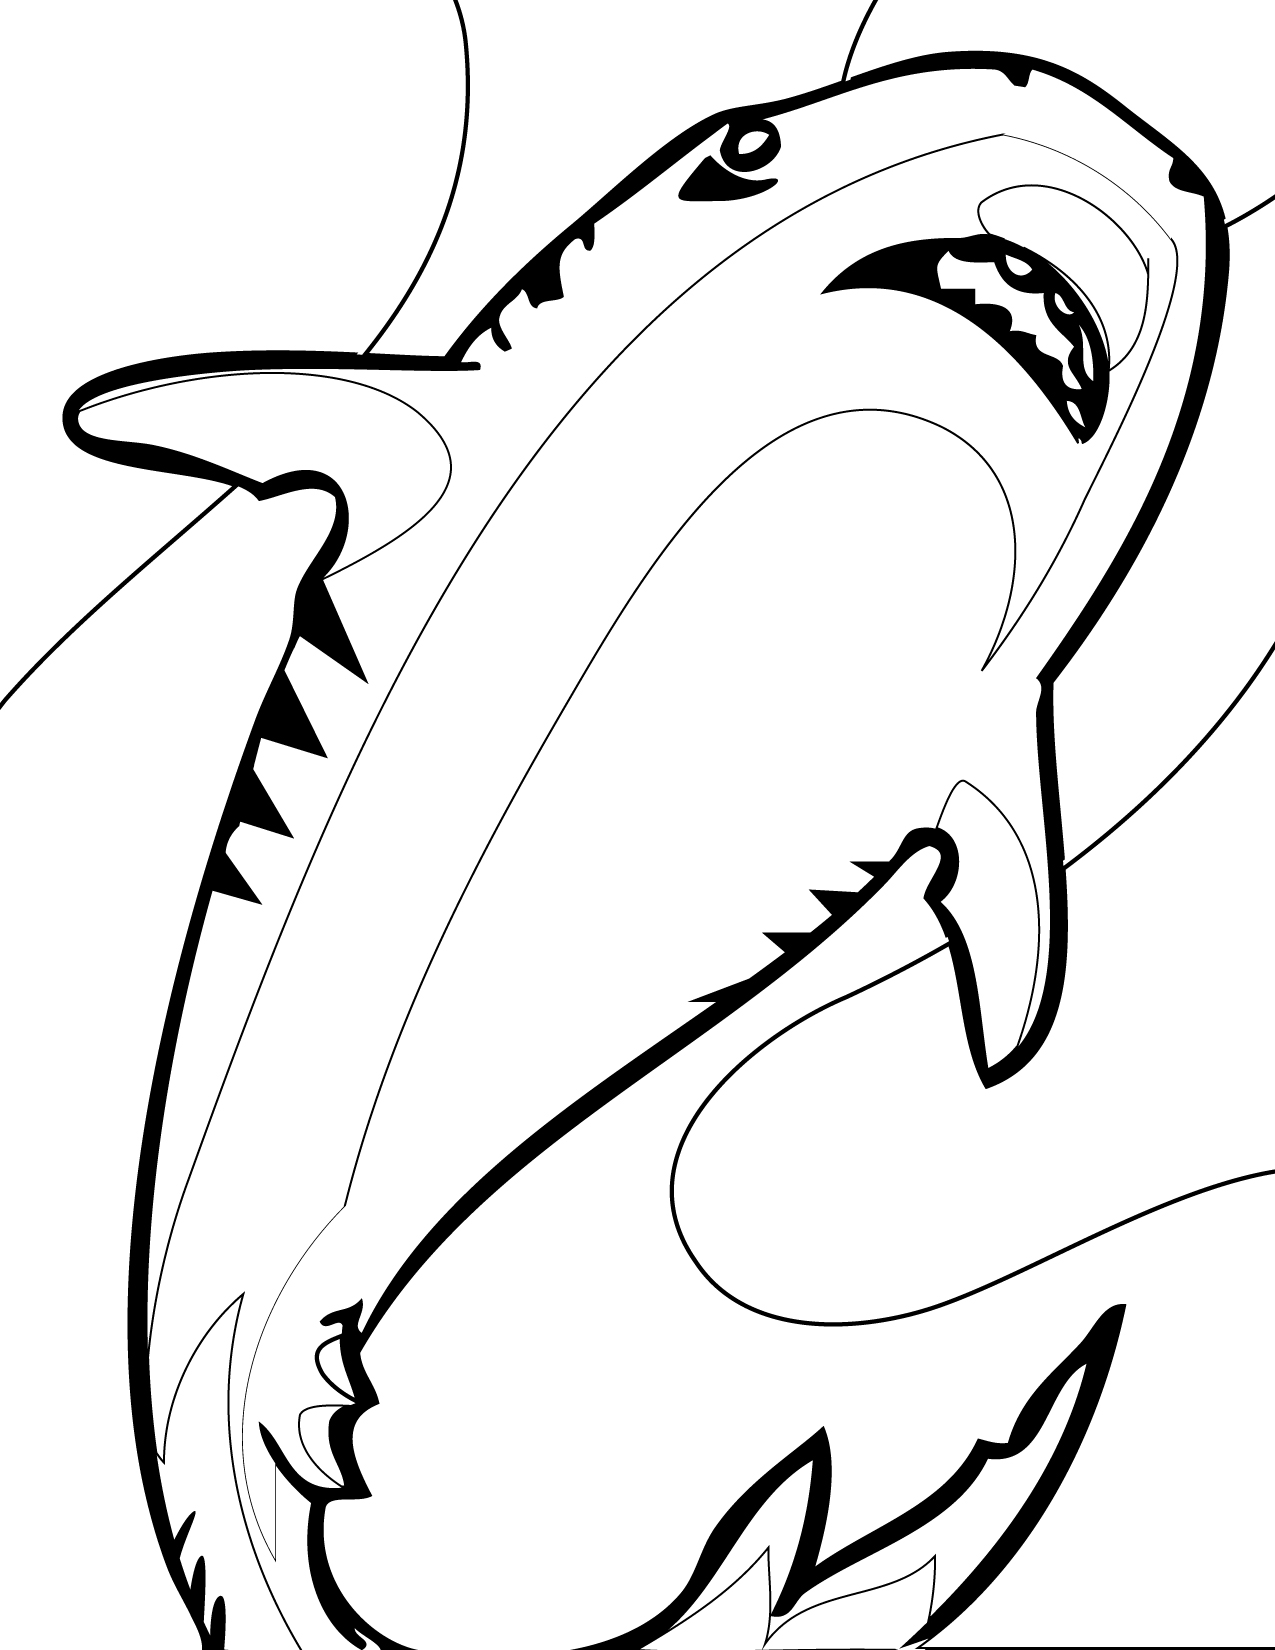 Free Printable Shark Coloring Pages For Kids - ClipArt Best - ClipArt Best